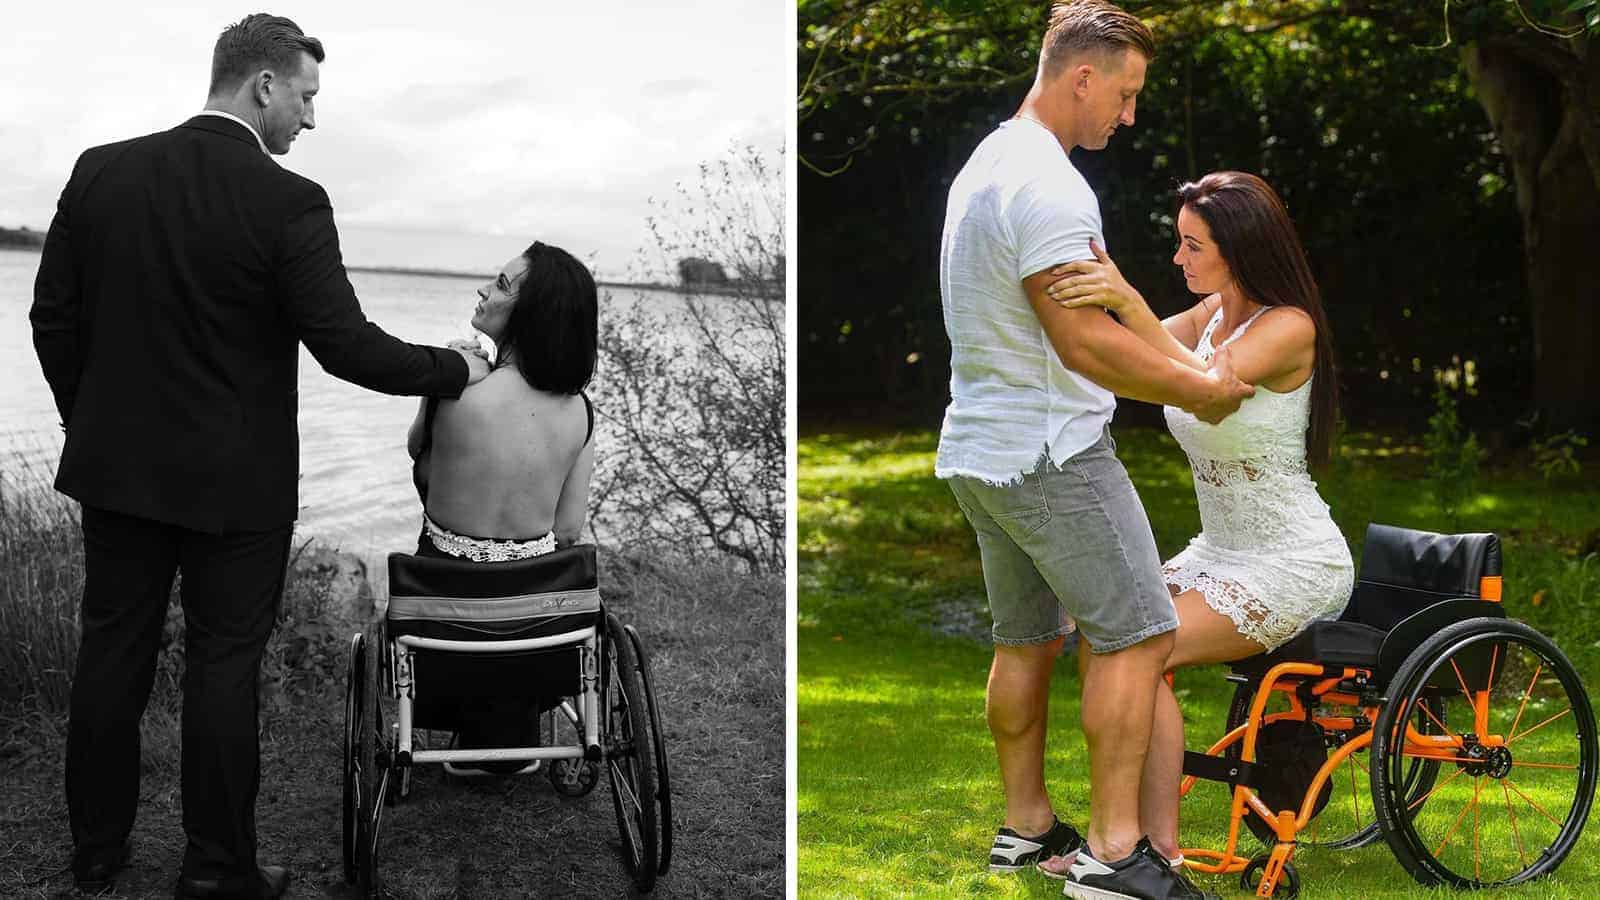 This Committed Couple Met in ADVERSITY Then Wrote Their Own LOVE STORY